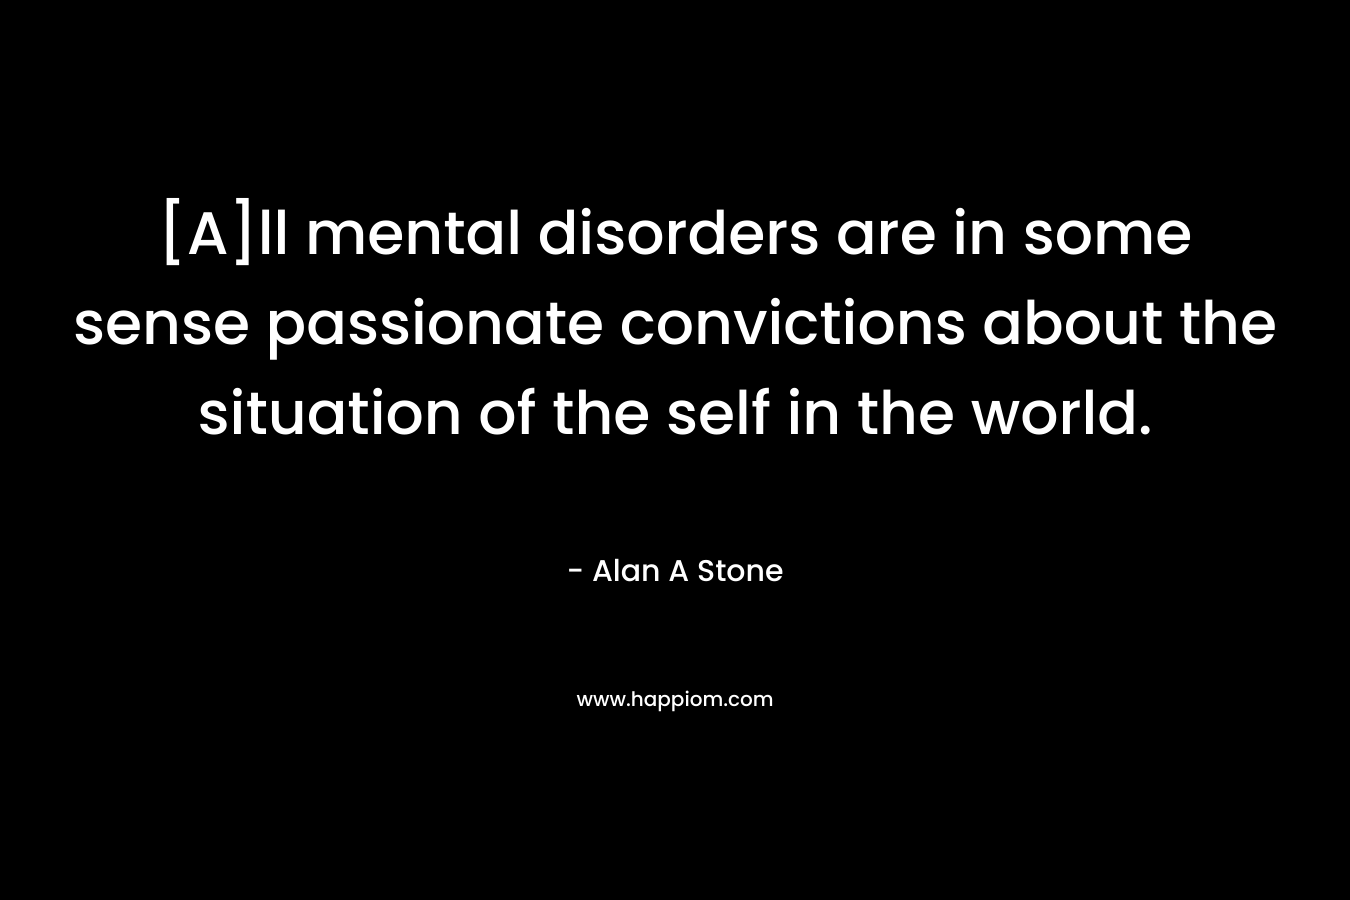 [A]ll mental disorders are in some sense passionate convictions about the situation of the self in the world. – Alan A Stone